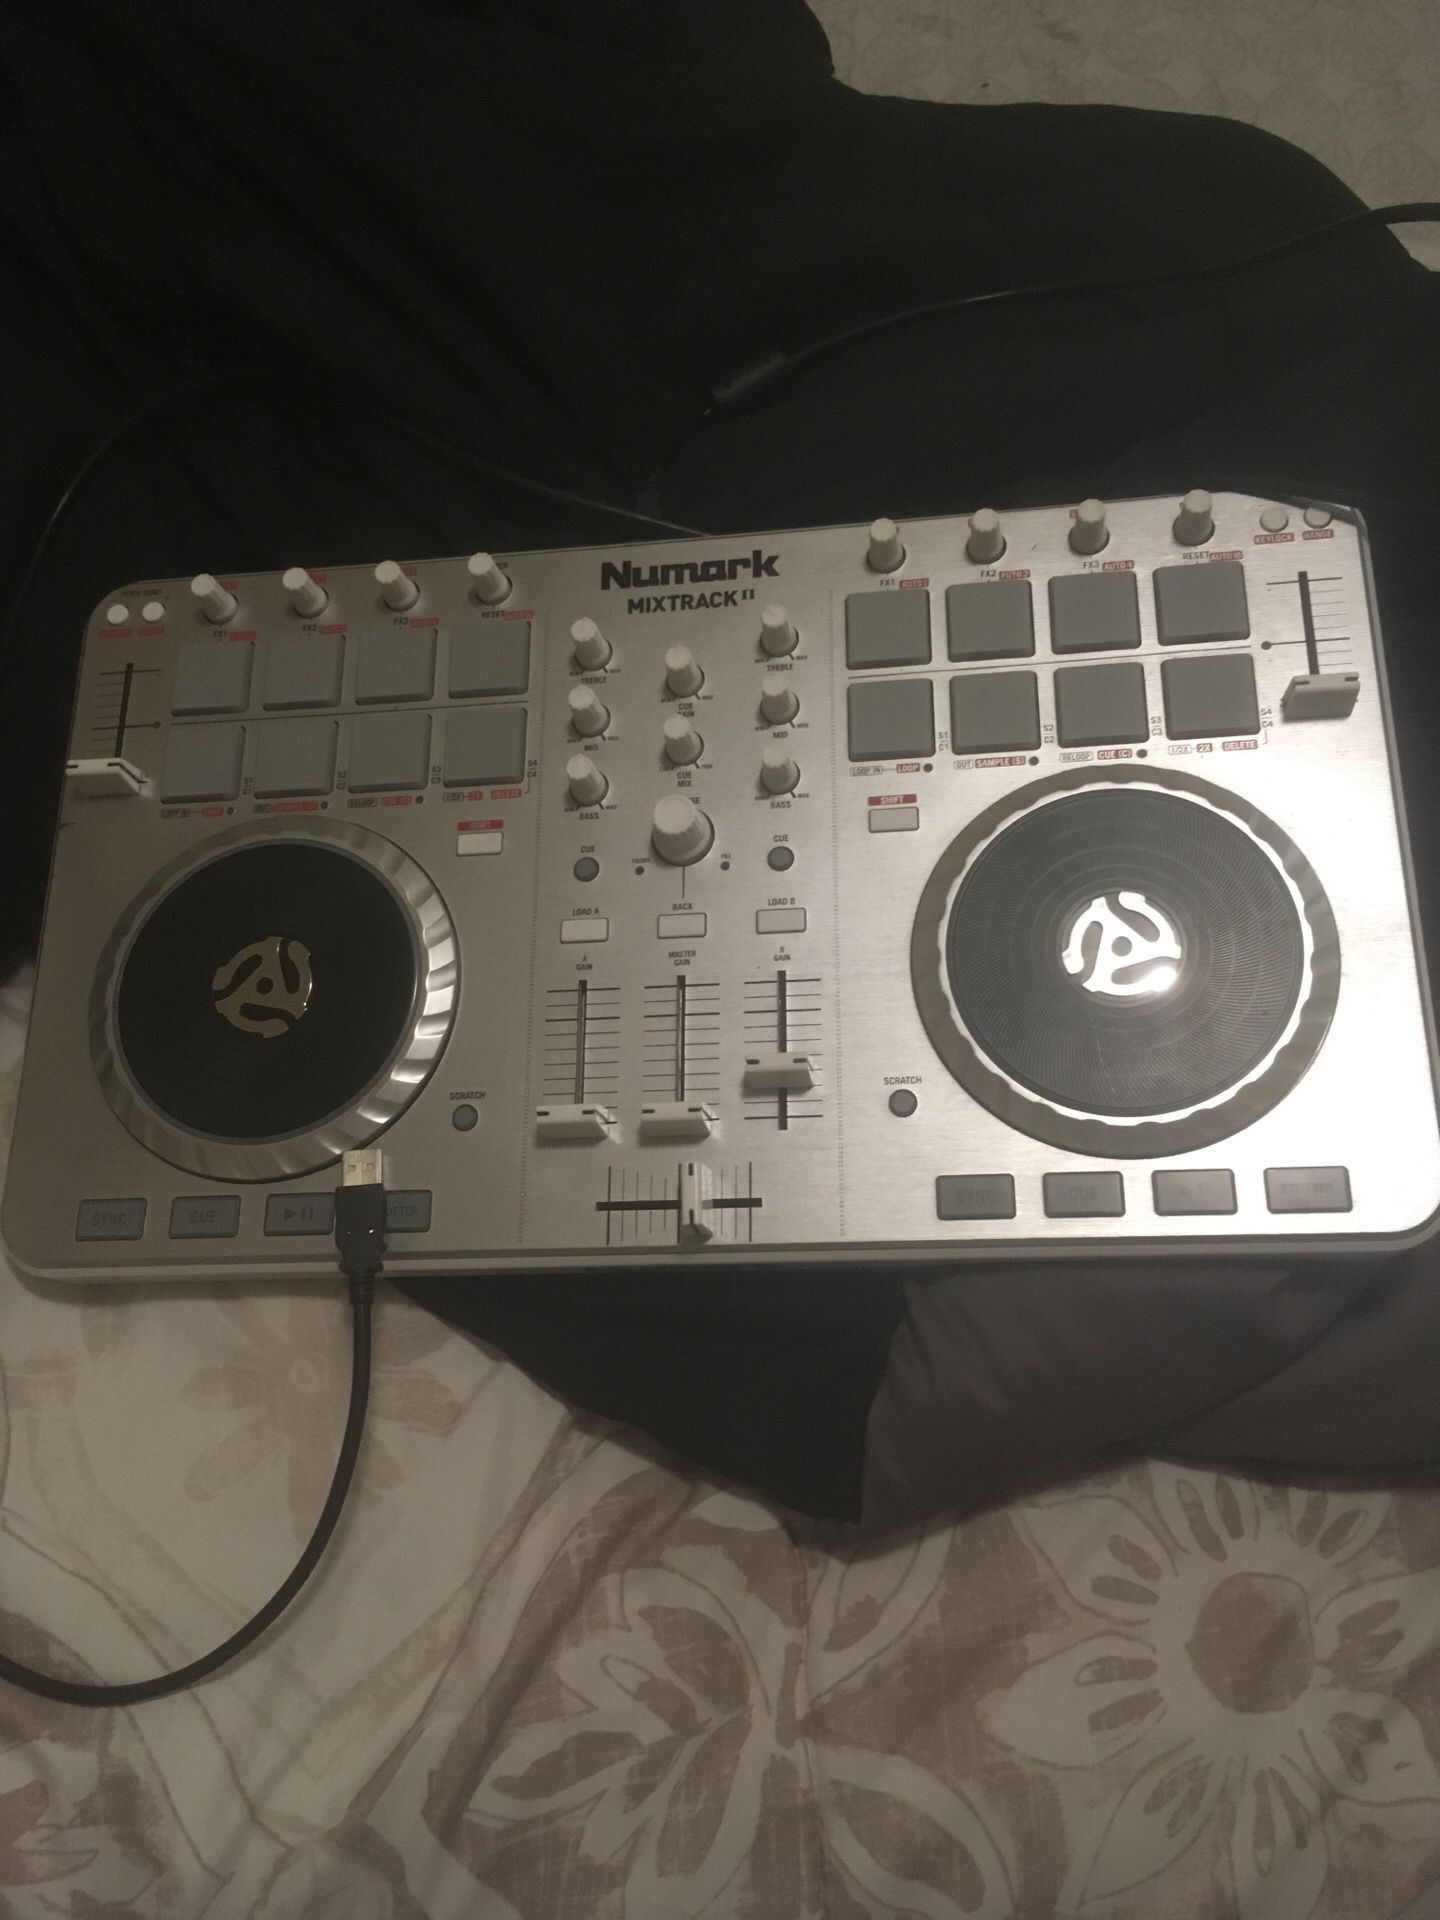 NUMARK Mixtrack II 50$ obo used twice my computers fried at the moment so I can’t use them selling to help towards getting a new pc.